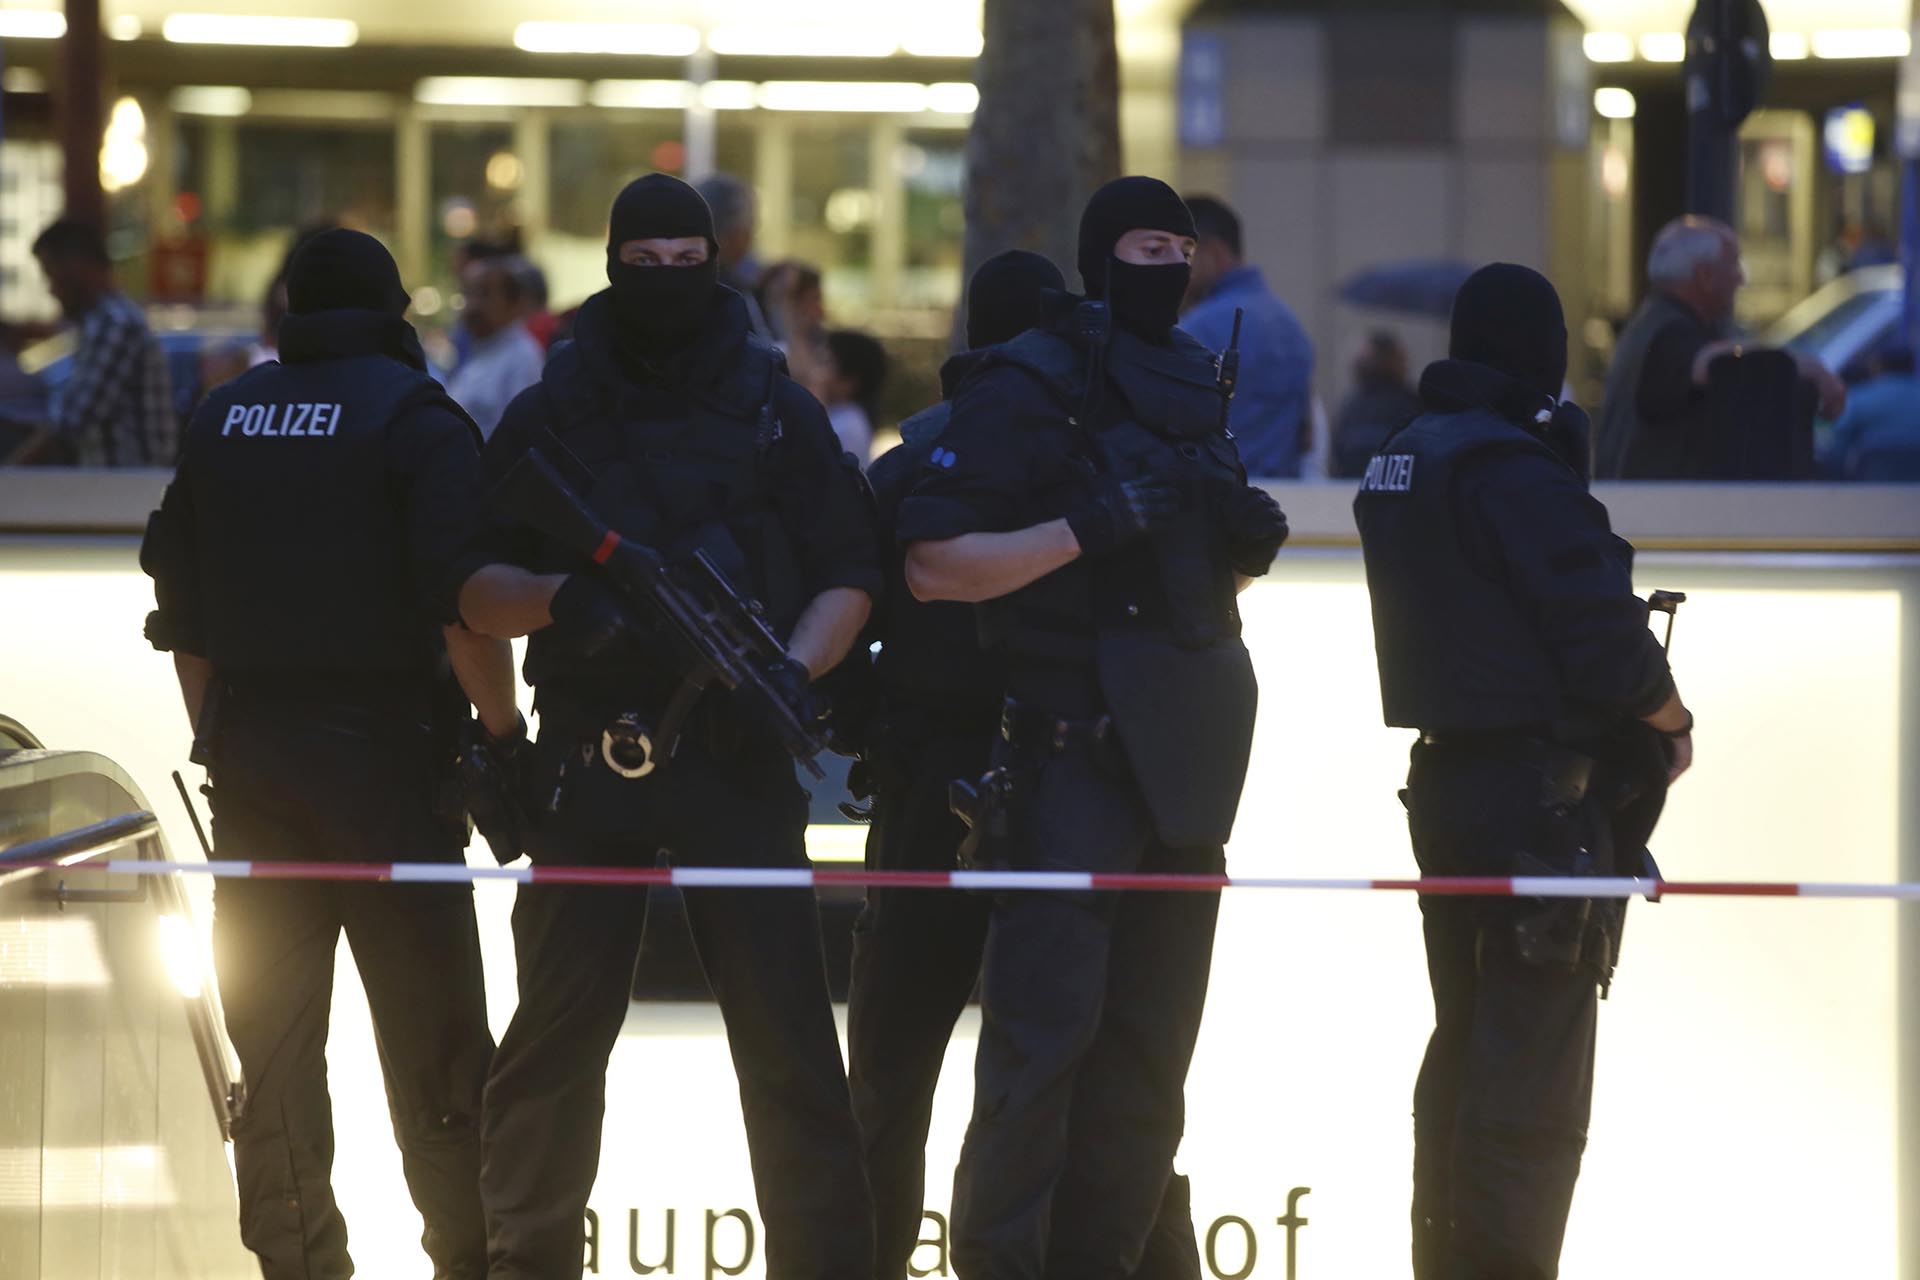 Special force police officers stand guard at an entrance of the main train station, following a shooting rampage at the Olympia shopping mall in Munich, Germany July 22, 2016. REUTERS/Michael Dalder